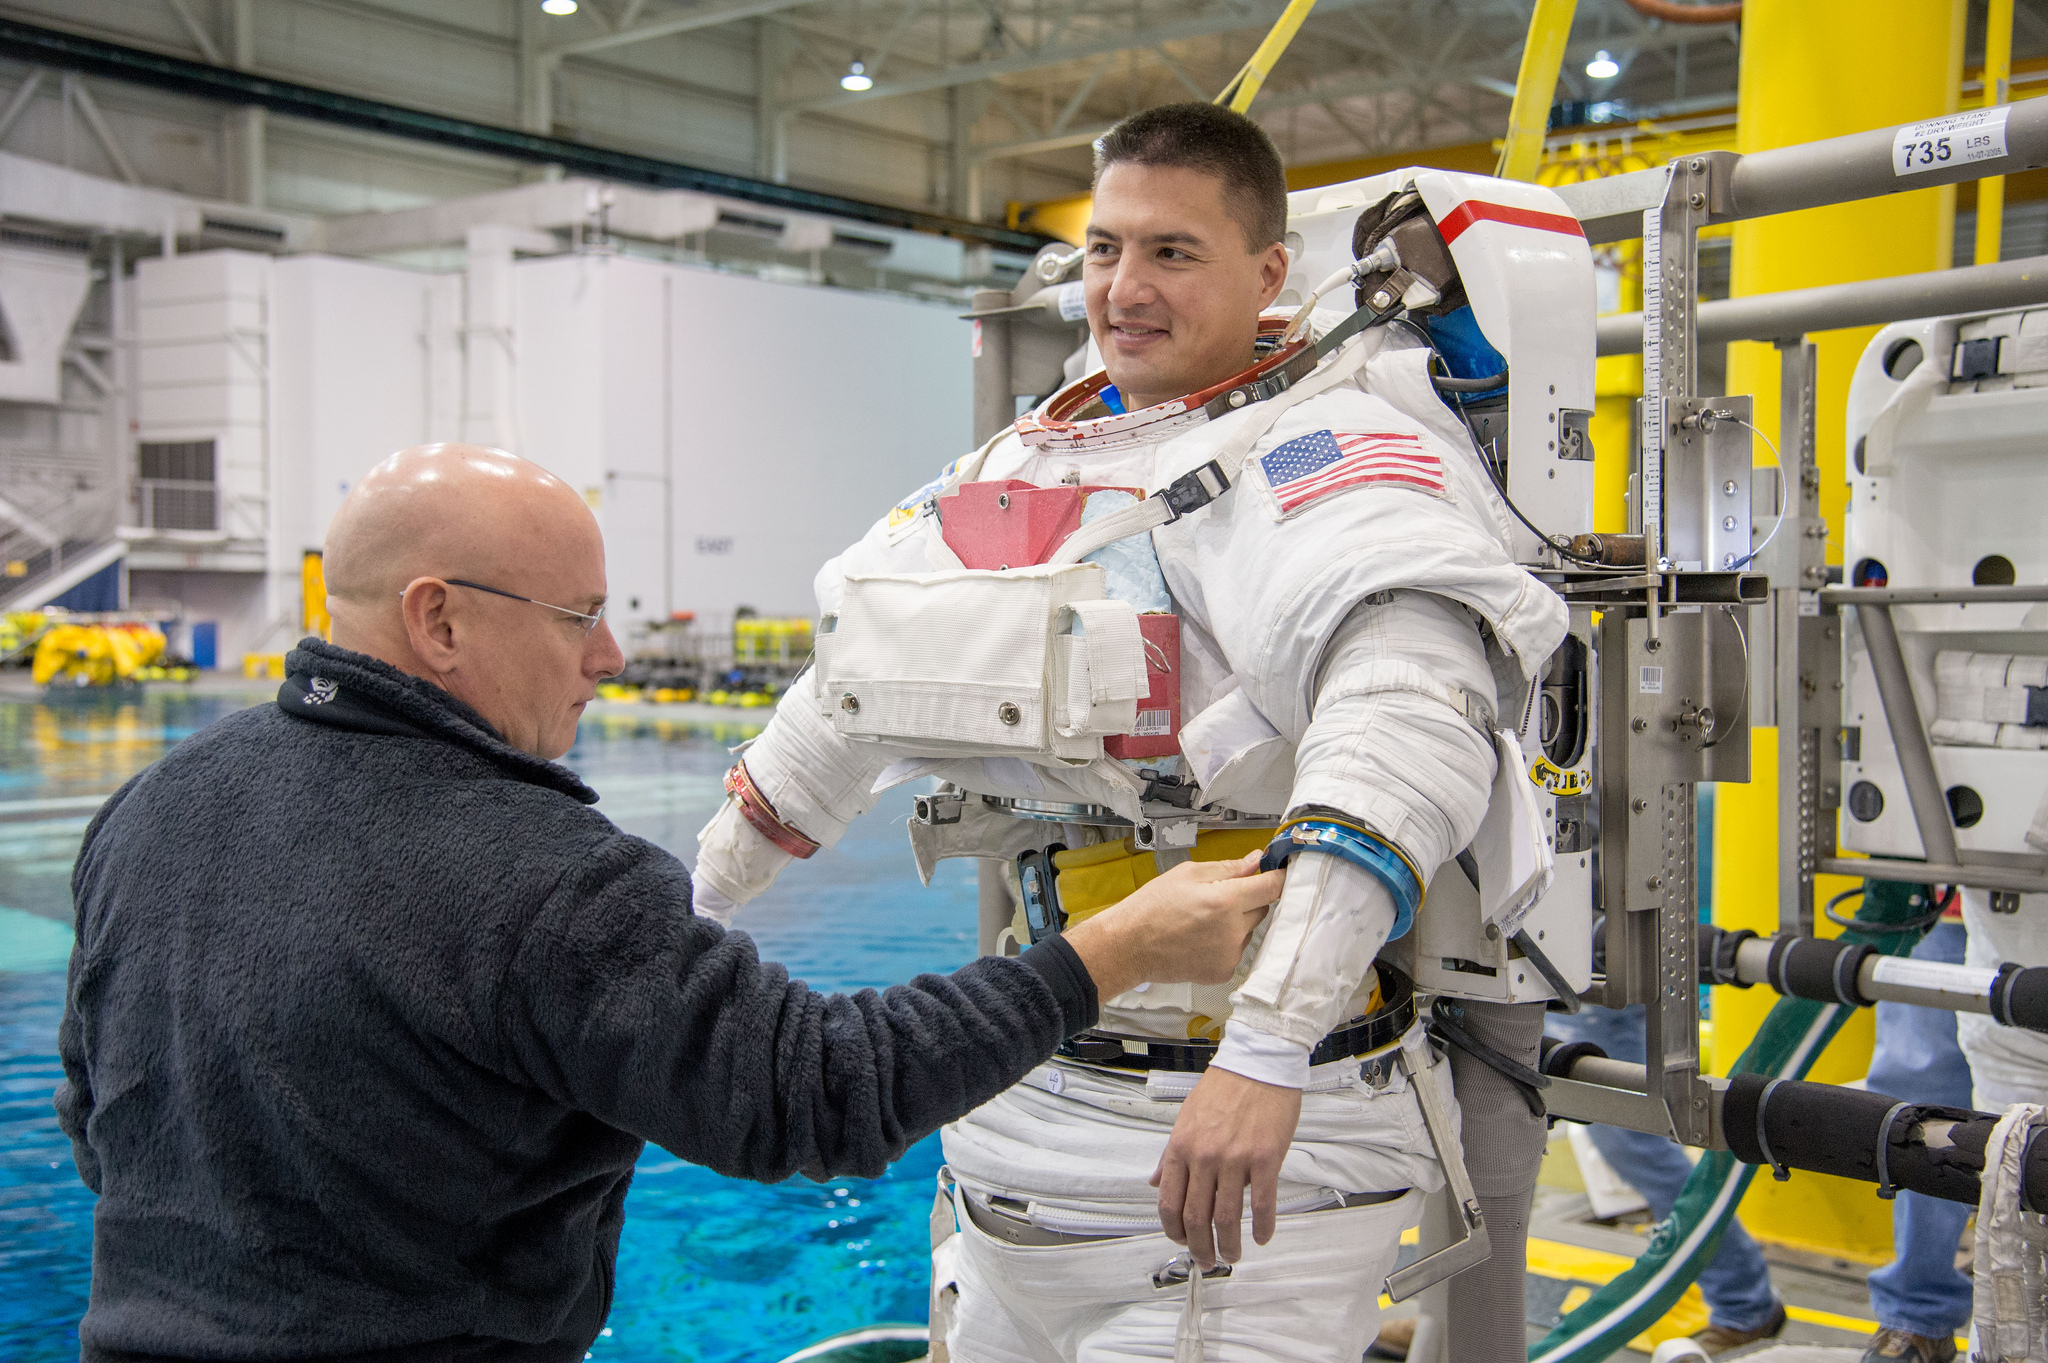 Preparing to make a house call: Scott Kelly, currently aboard the space station for a one-year stay, checks out spacewalk suit of space doc Kjell Lindgren, who blasts off next month